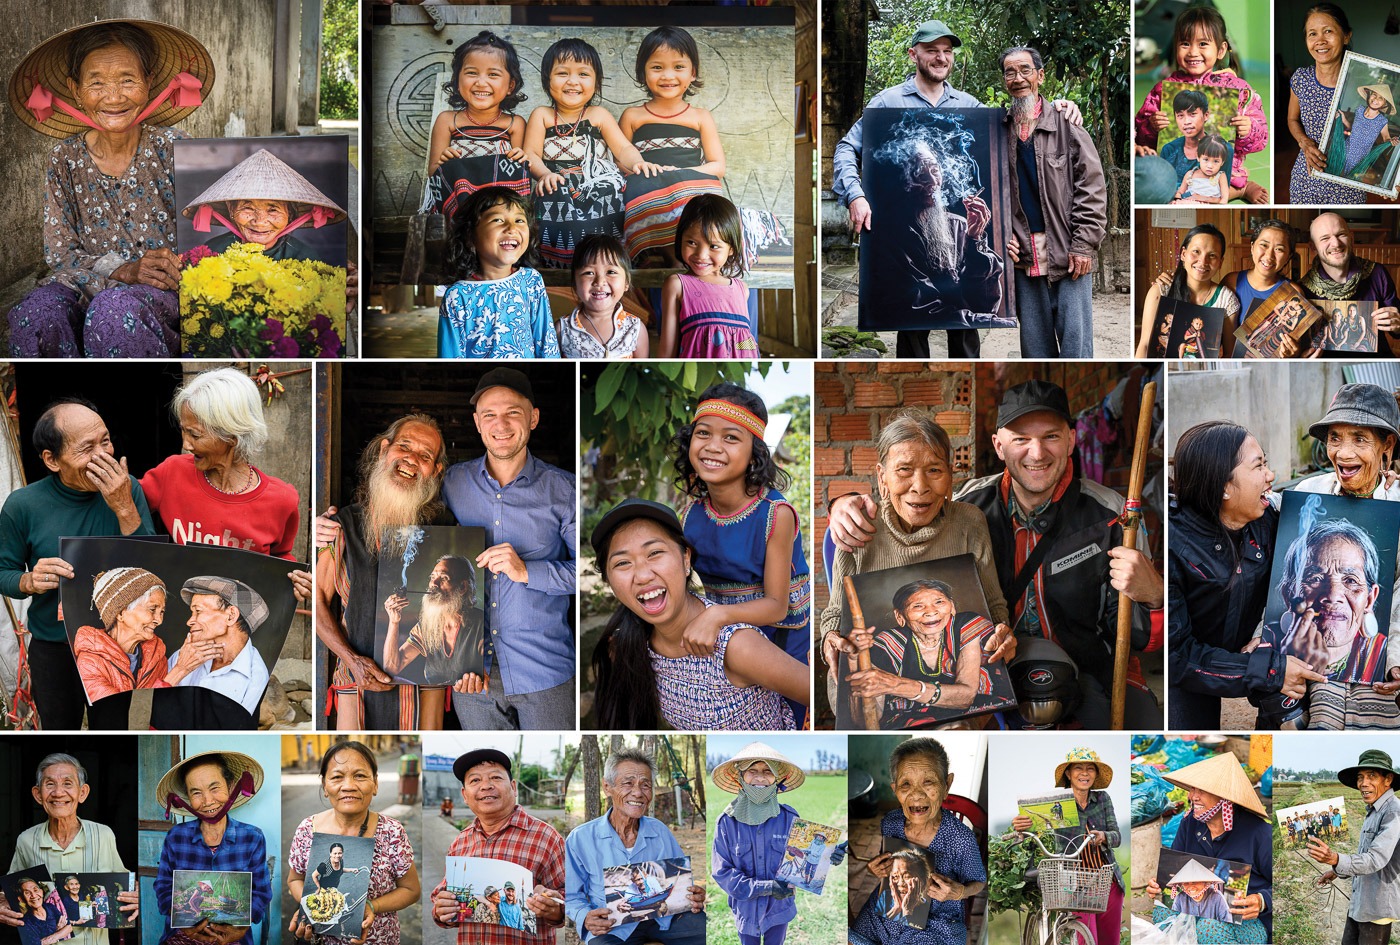 Pictures for the People of Vietnam